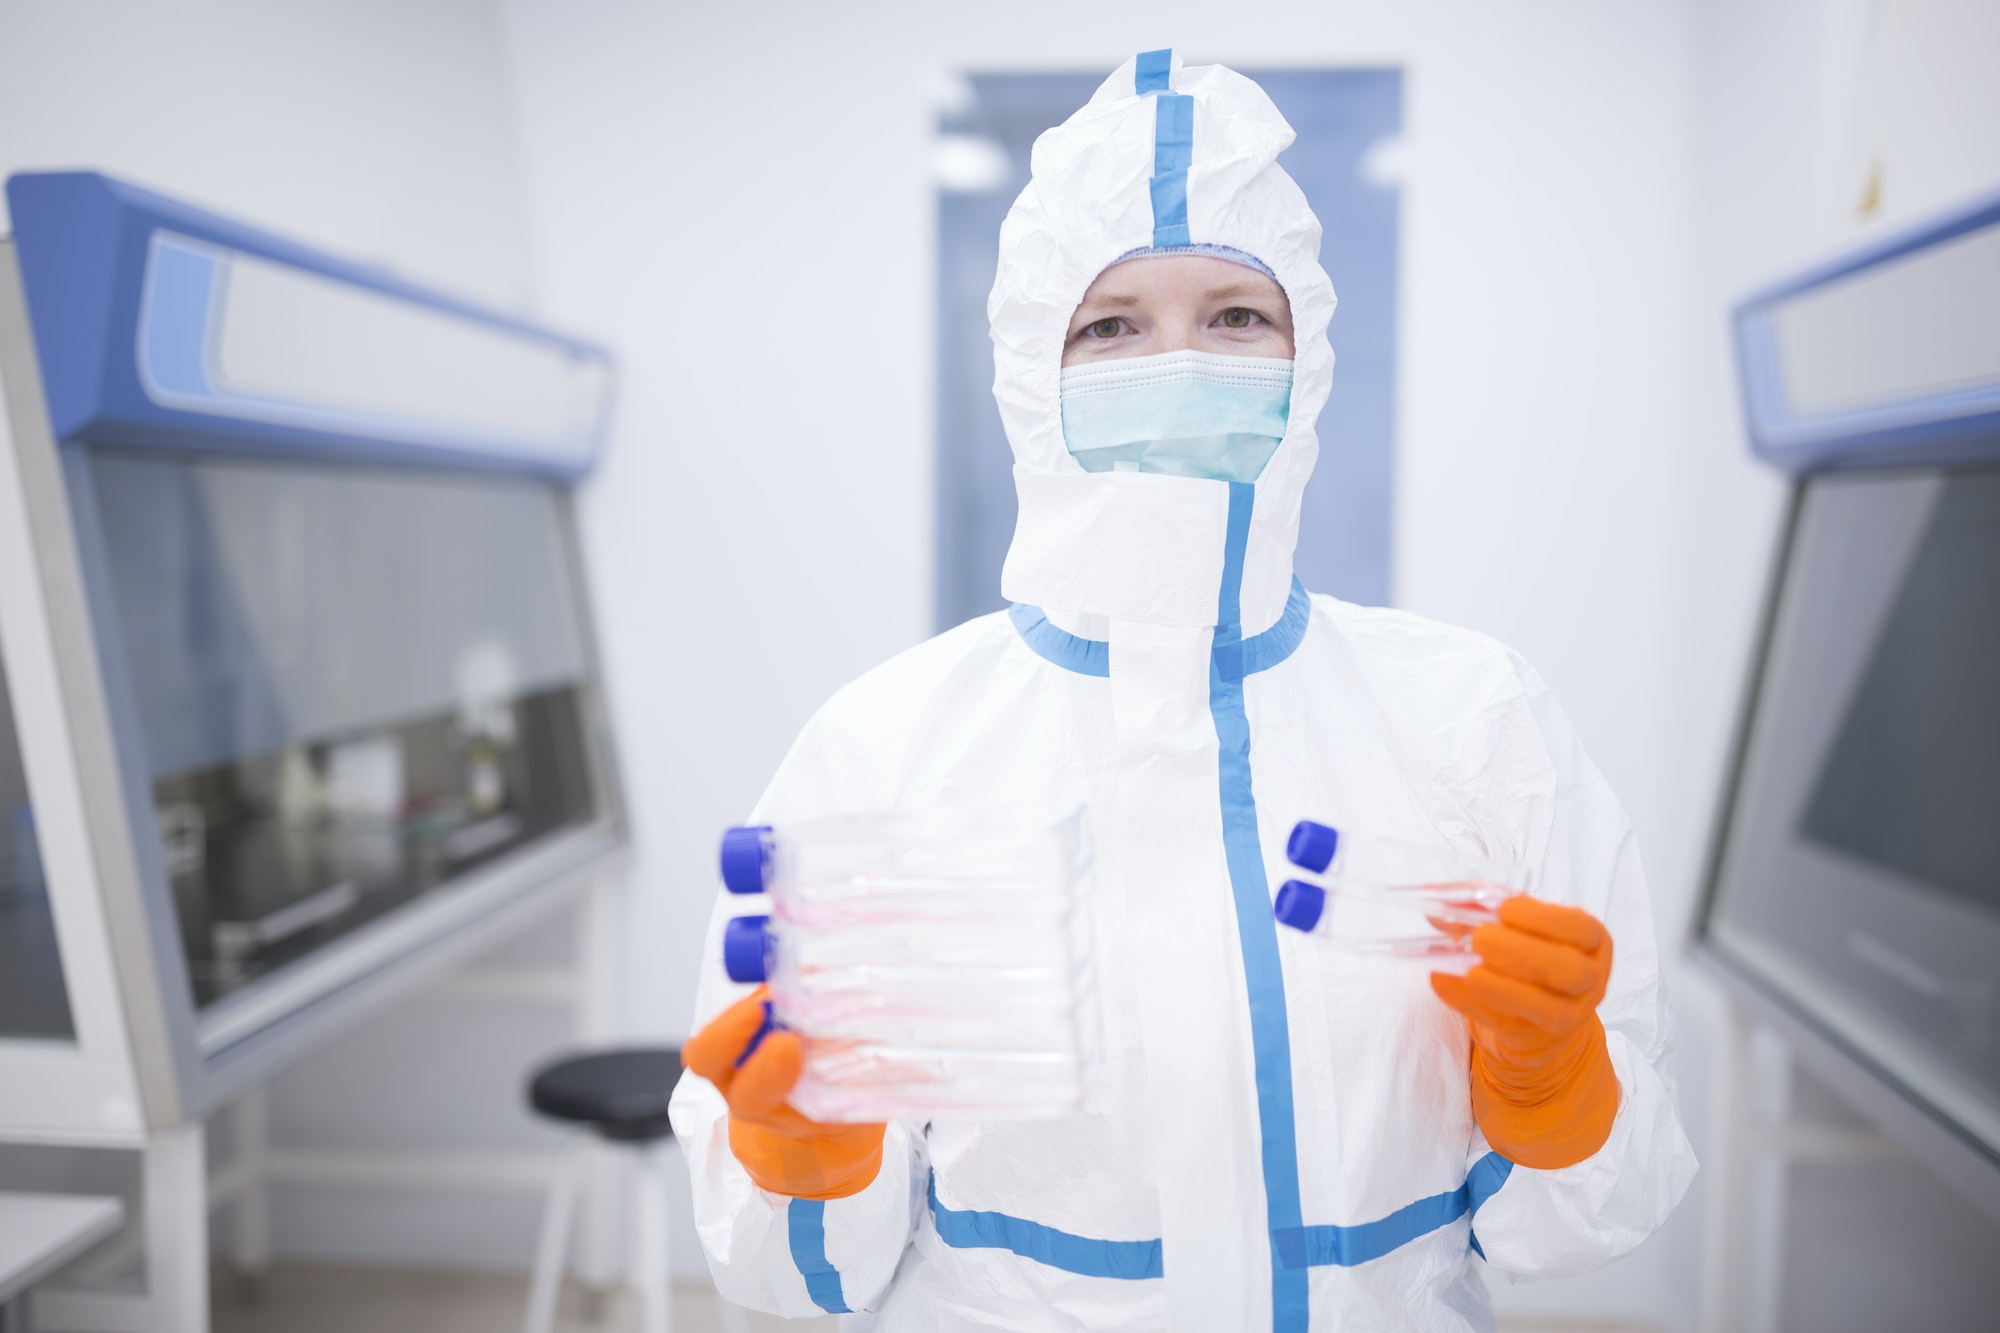 Lab technician wearing cleanroom overall holding cultivation containers